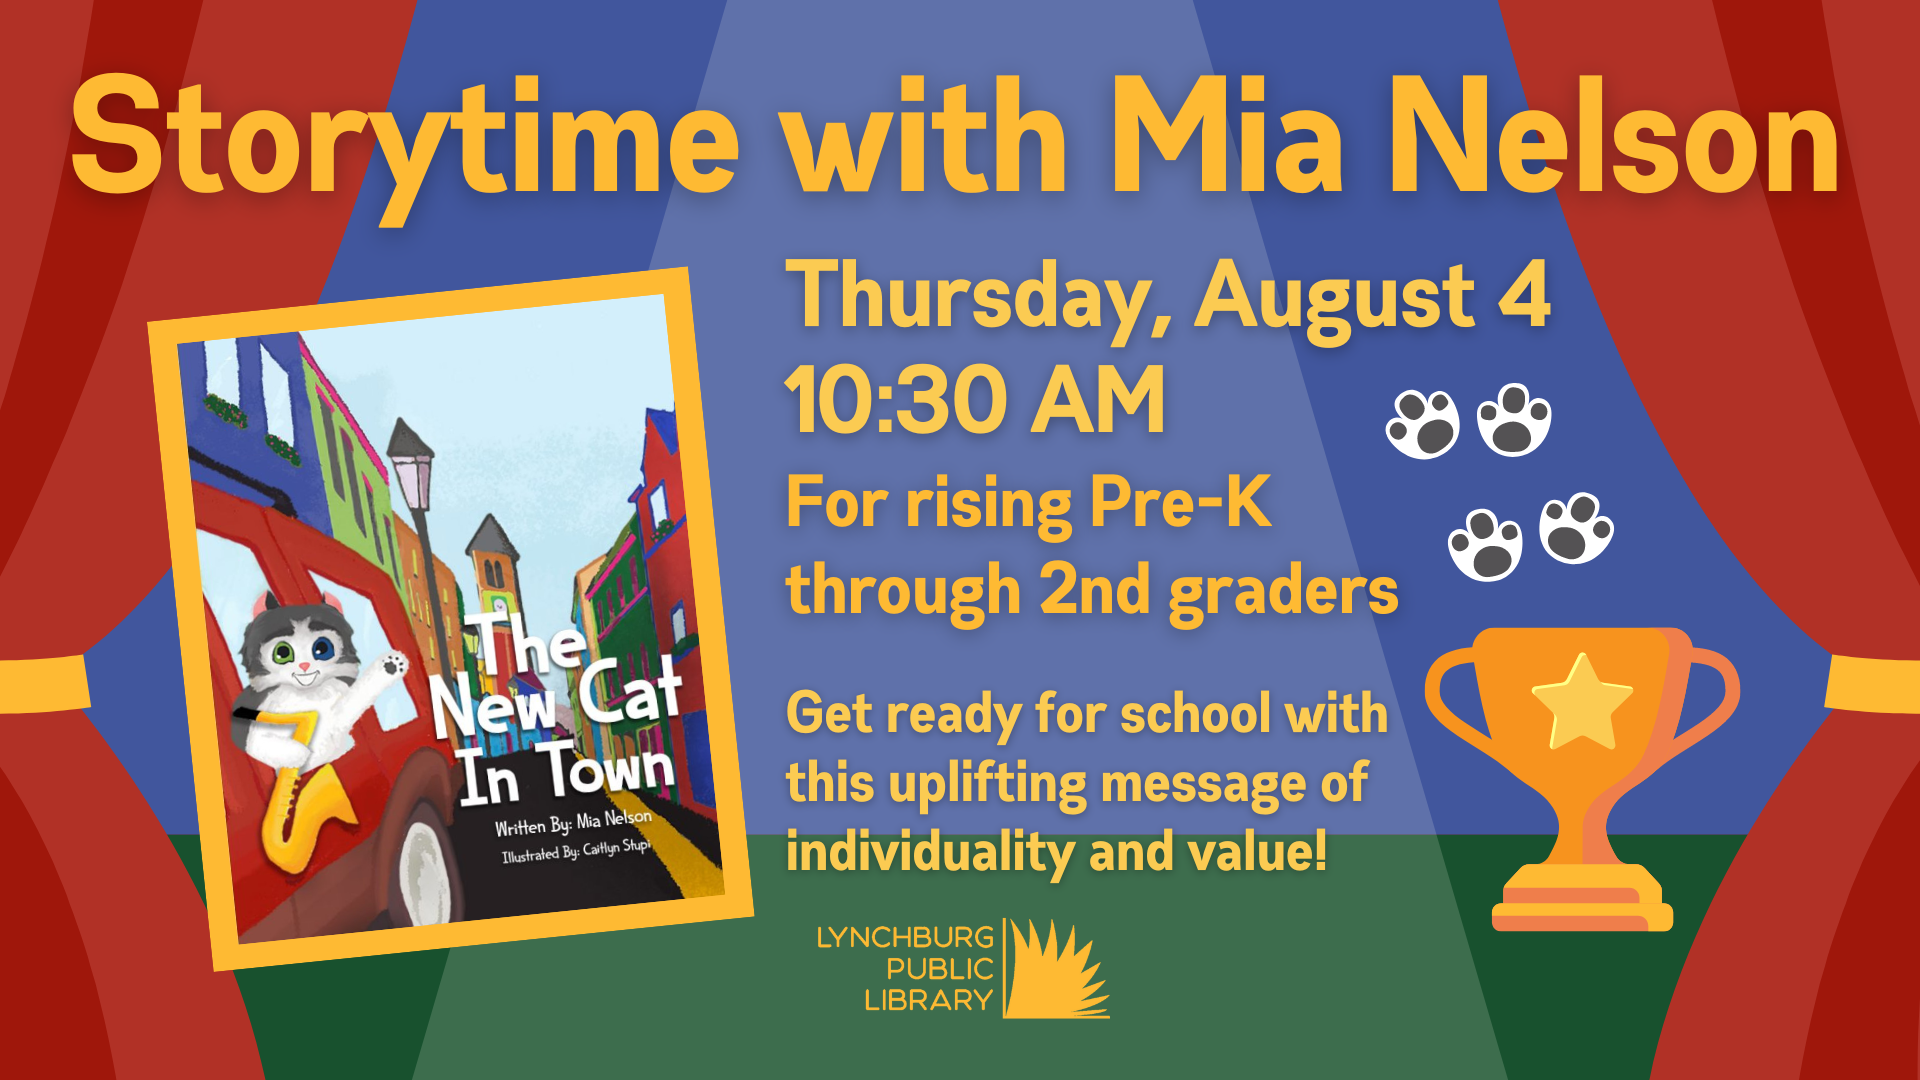 Storytime with Mia Nelson August 4, 10:30 AM for rising Pre-K through 2nd grade students